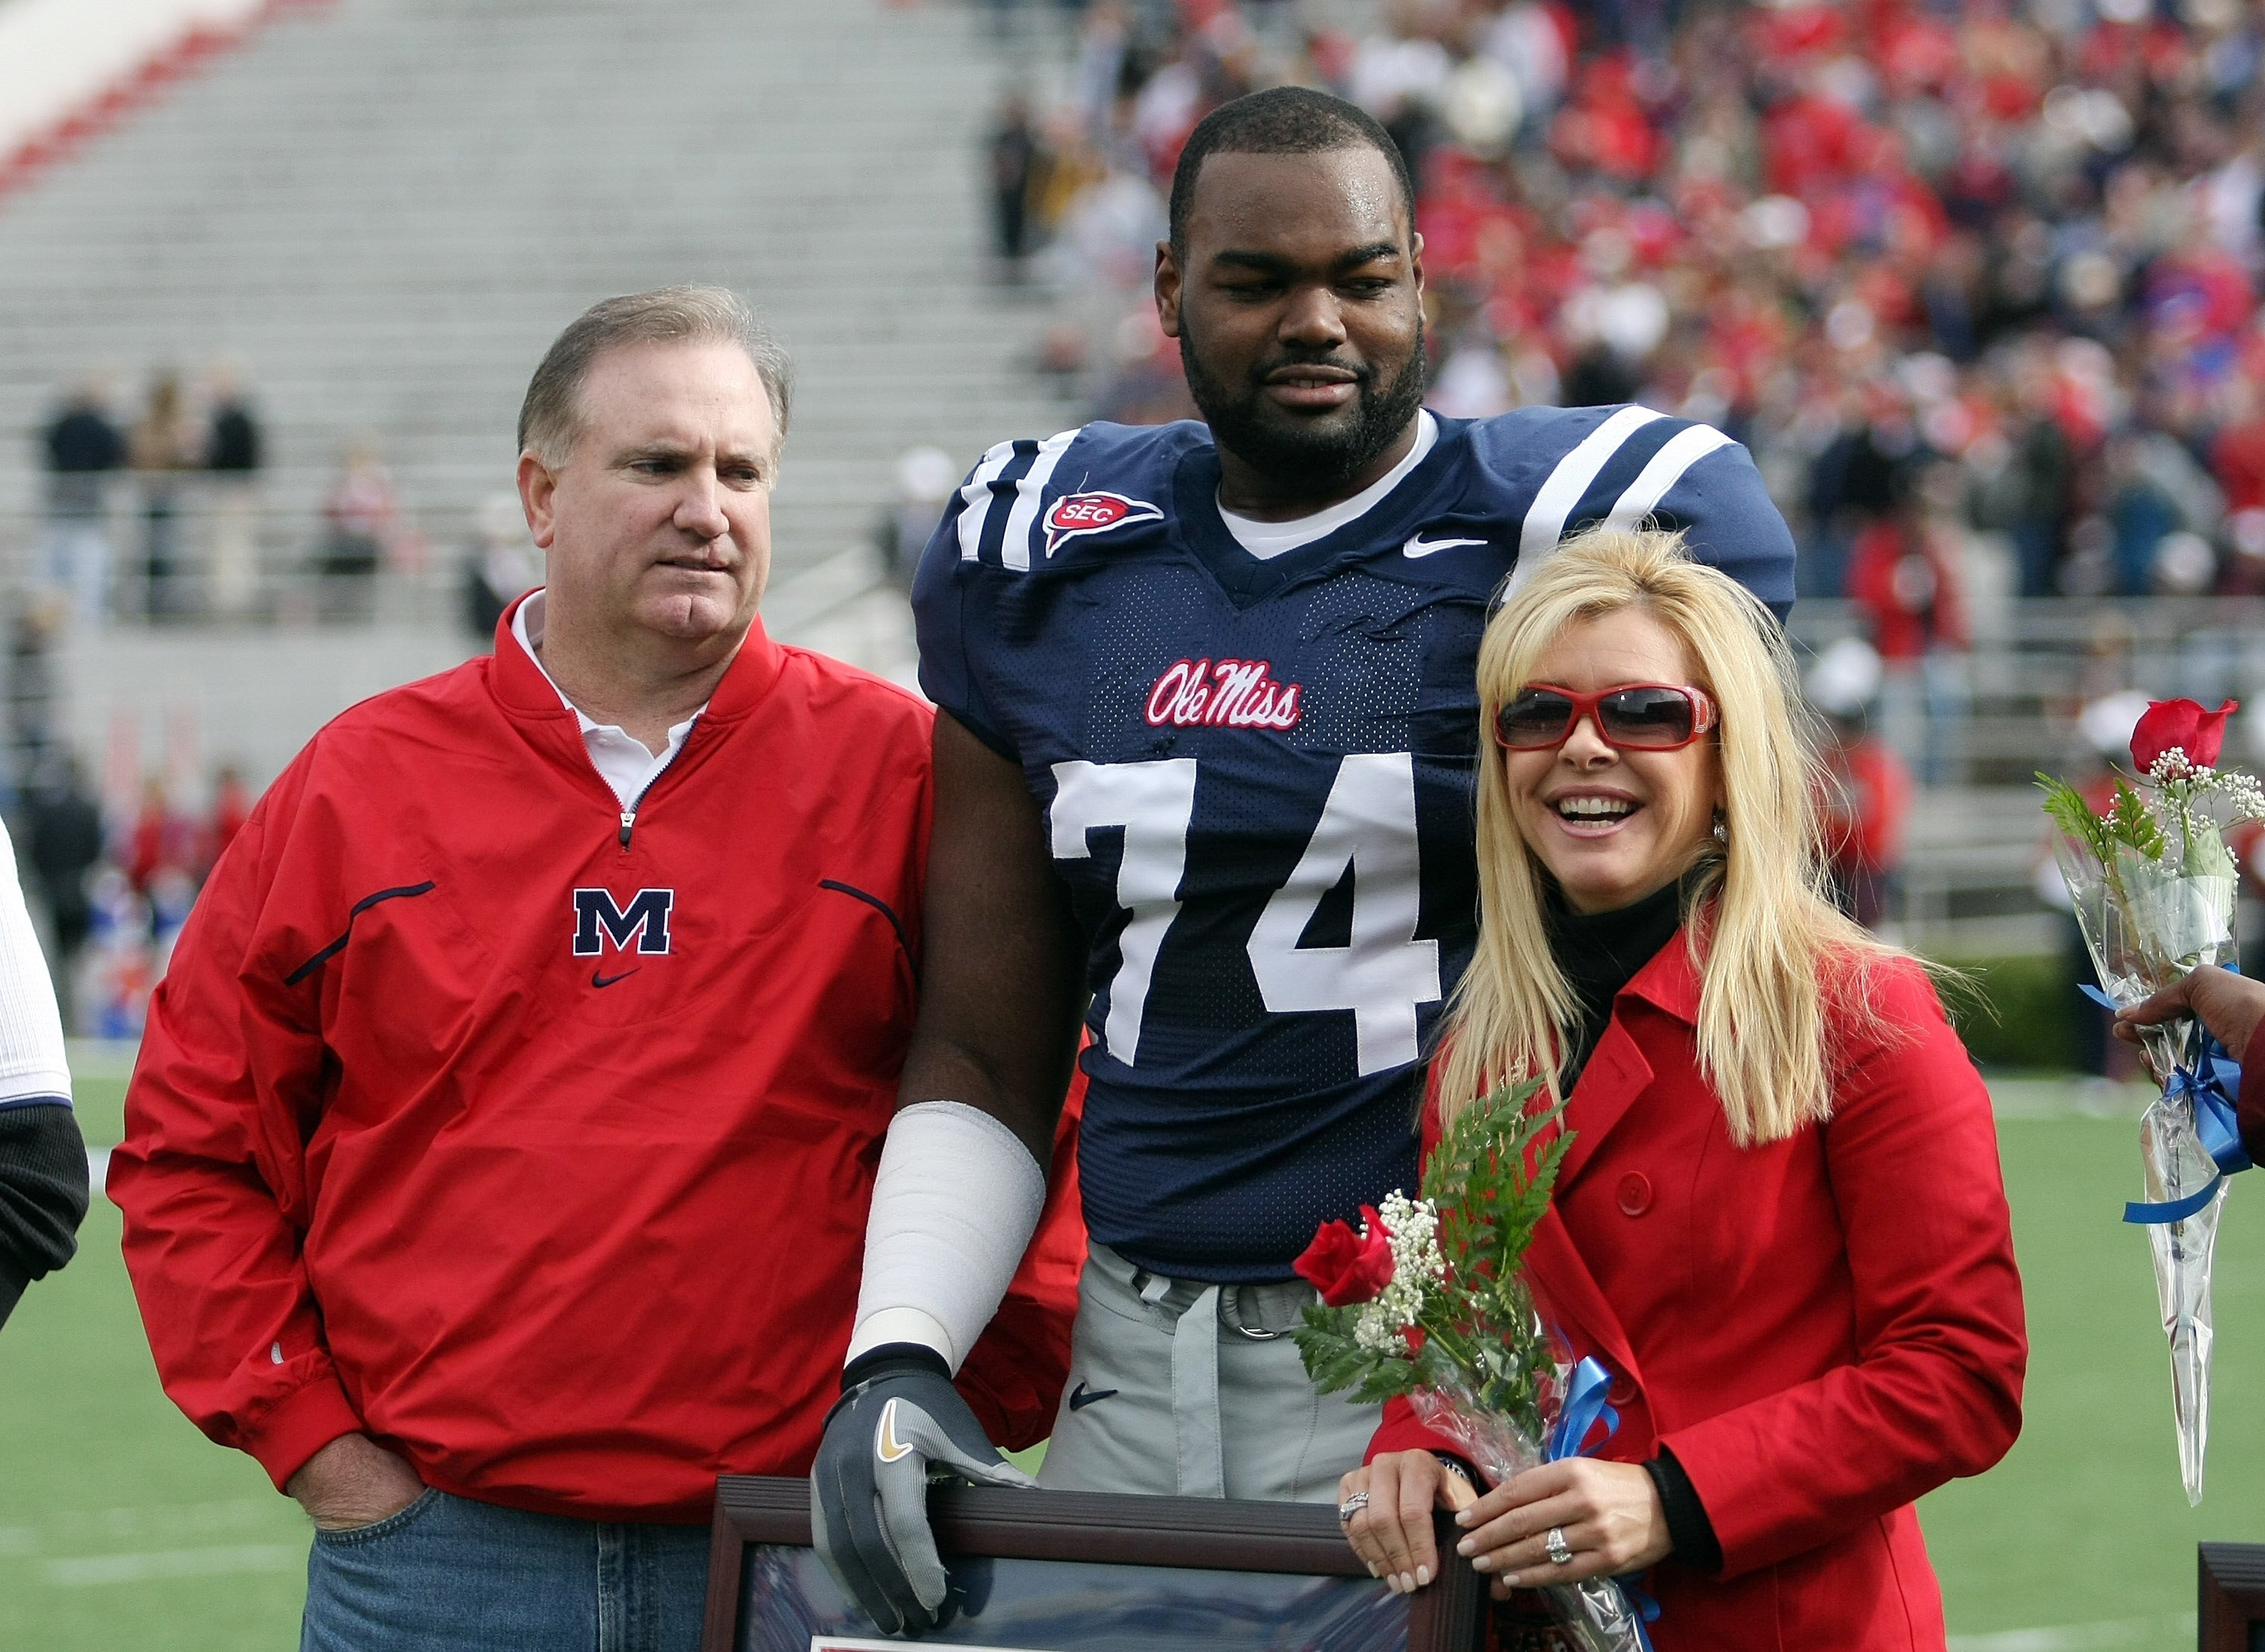 Michael Oher with his family at Vaught-Hemingway Stadium on November 28, 2008, in Oxford, Mississippi. | Source: Getty Images